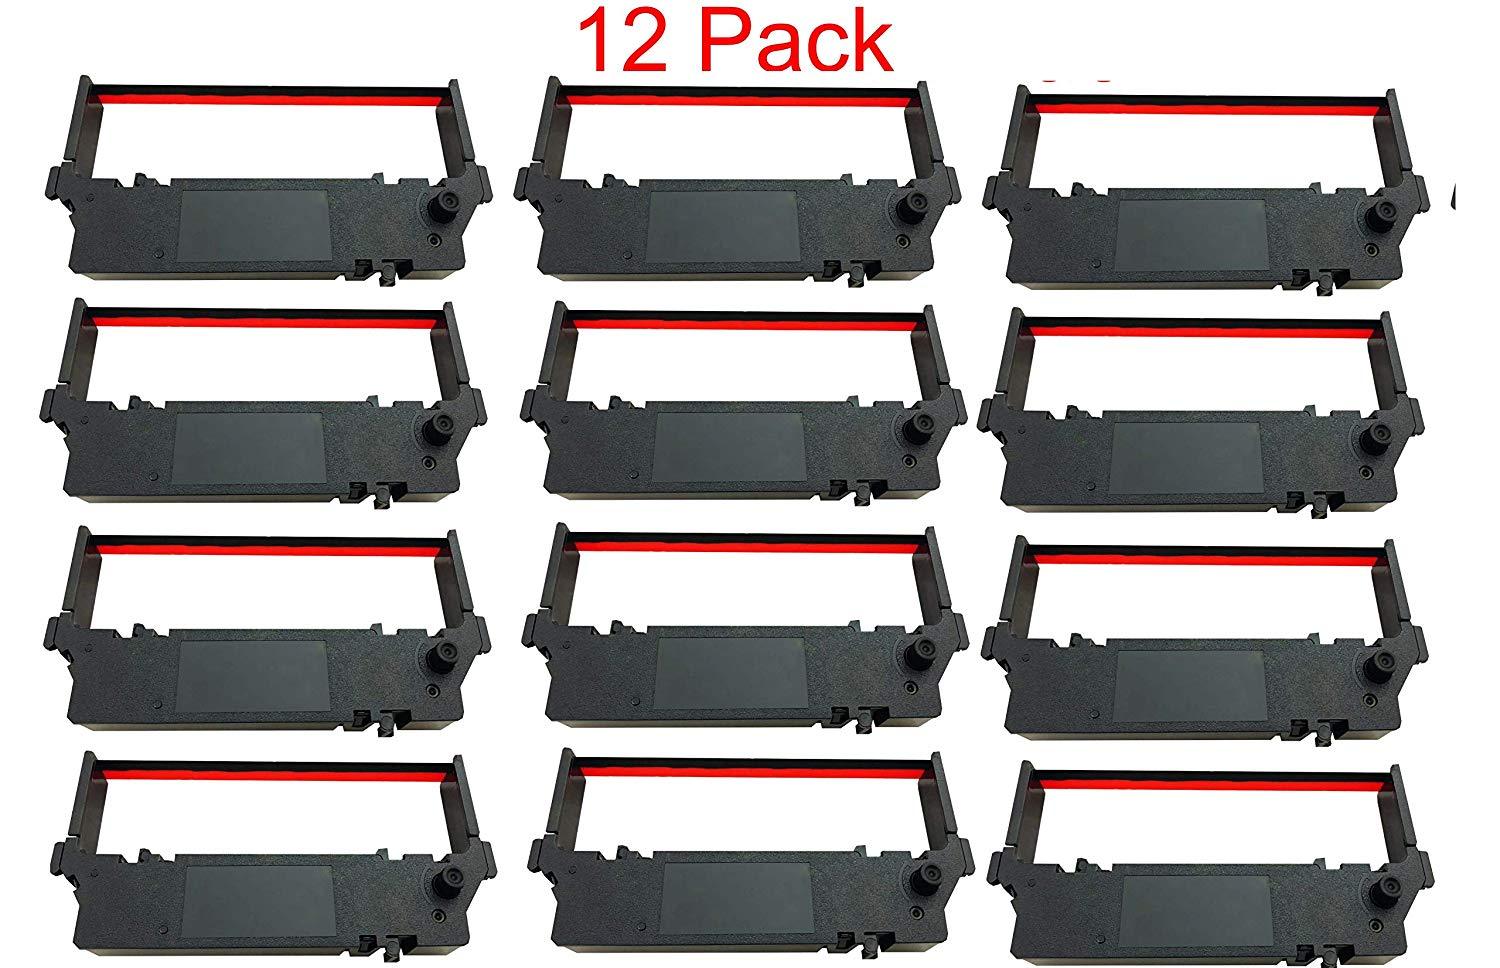 SP-700 Black and Red Ribbon Ink Cartridge Compatible with Star SP-700BR, RC-700BR, SP-712, SP-742 POS Printer Ribbon (12 Pack)